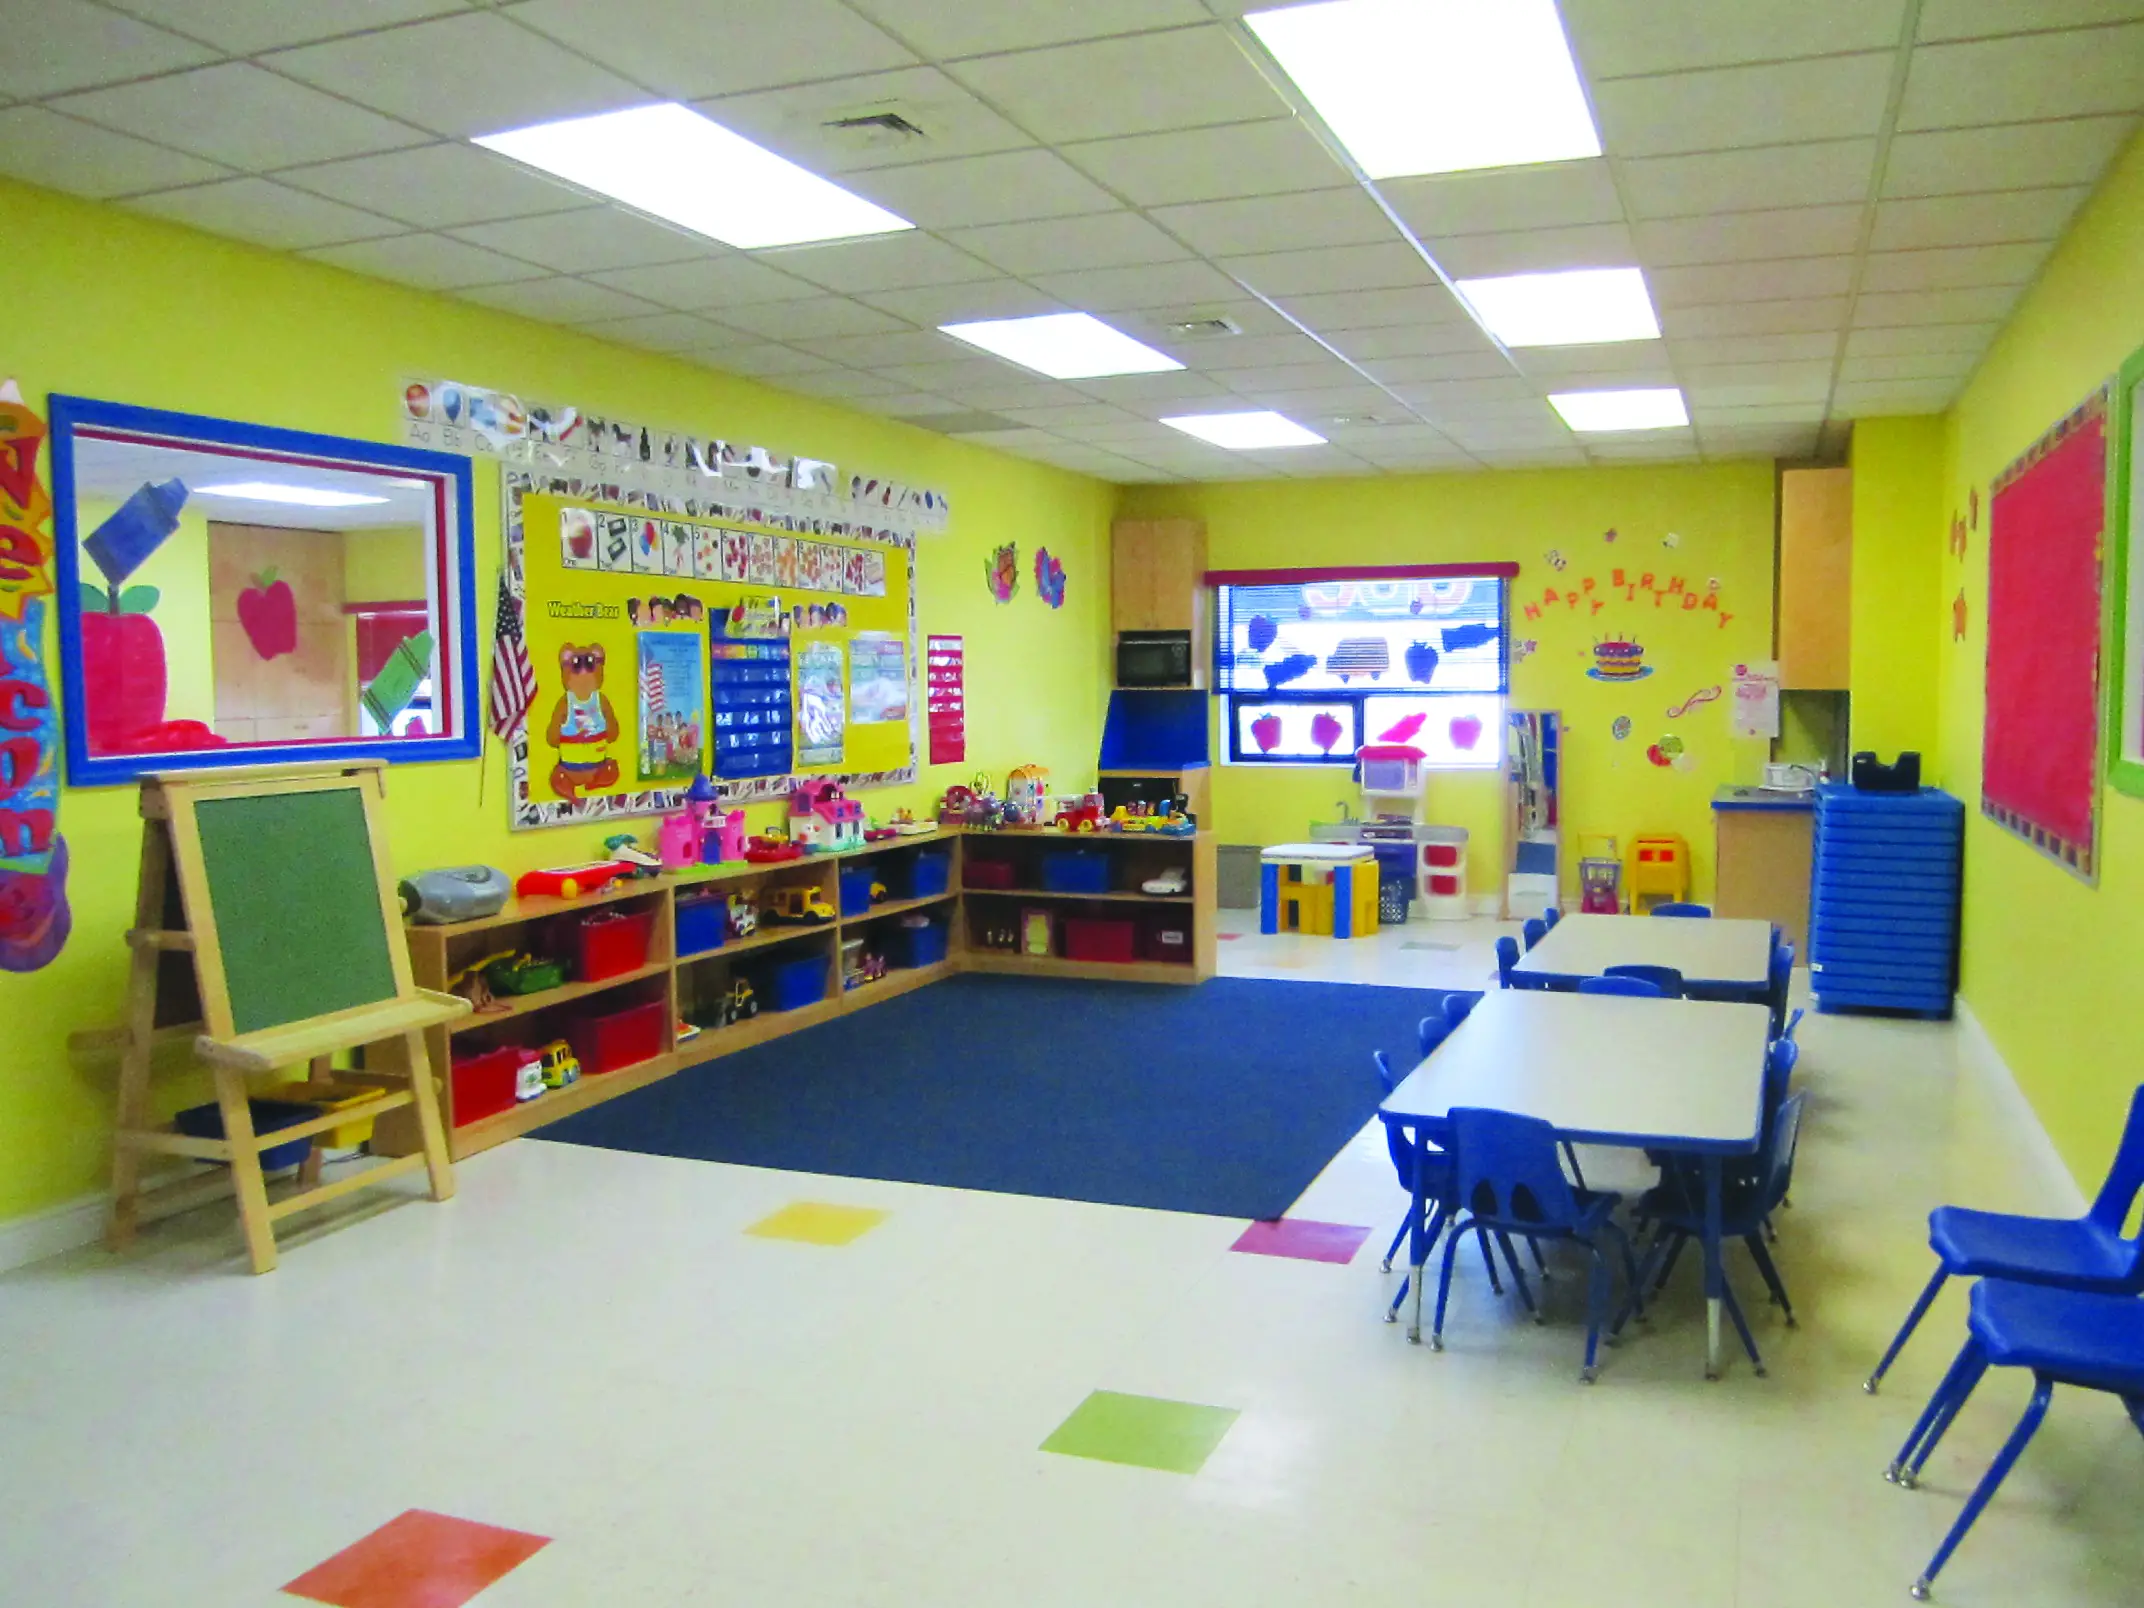 Sunshine Daycare Center’s curriculum will emphasize reading, writing, math, and science skills, as well as fine and gross motor skills.